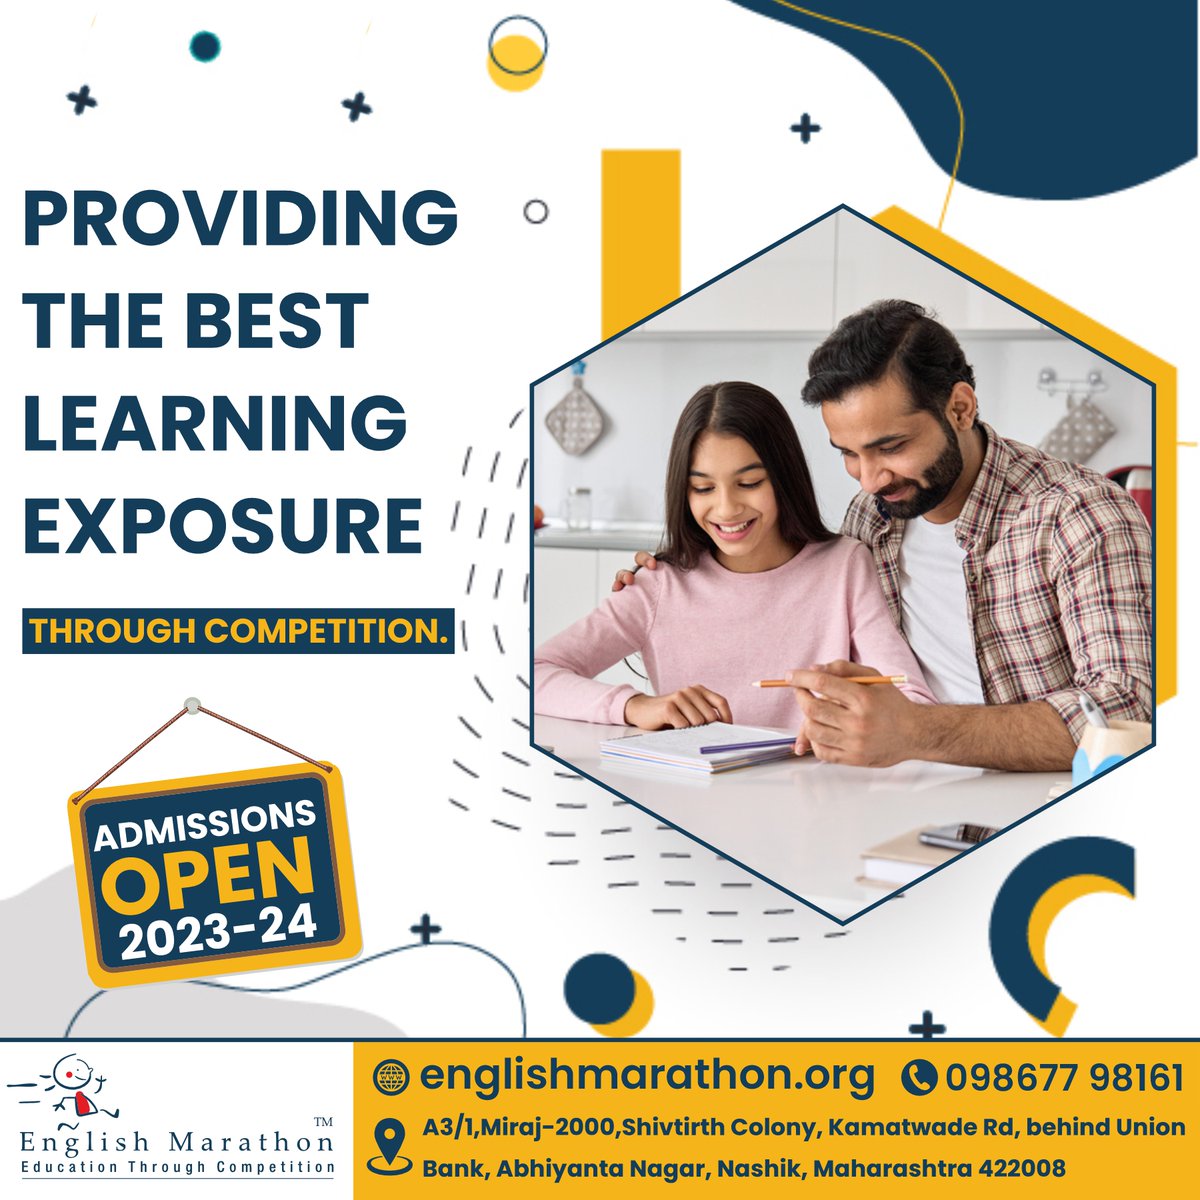 #LearnThroughCompetition
#CompetitiveLearning
#EducationCompetition
#ExcellenceThroughCompetition
#CompetitiveEdgeLearning
#LearningToWin
#CompetitionInEducation
#BestLearningExperience
#CompetitionMatters
#CompetitiveAdvantage
#ChallengeAccepted
#CompeteToSucceed